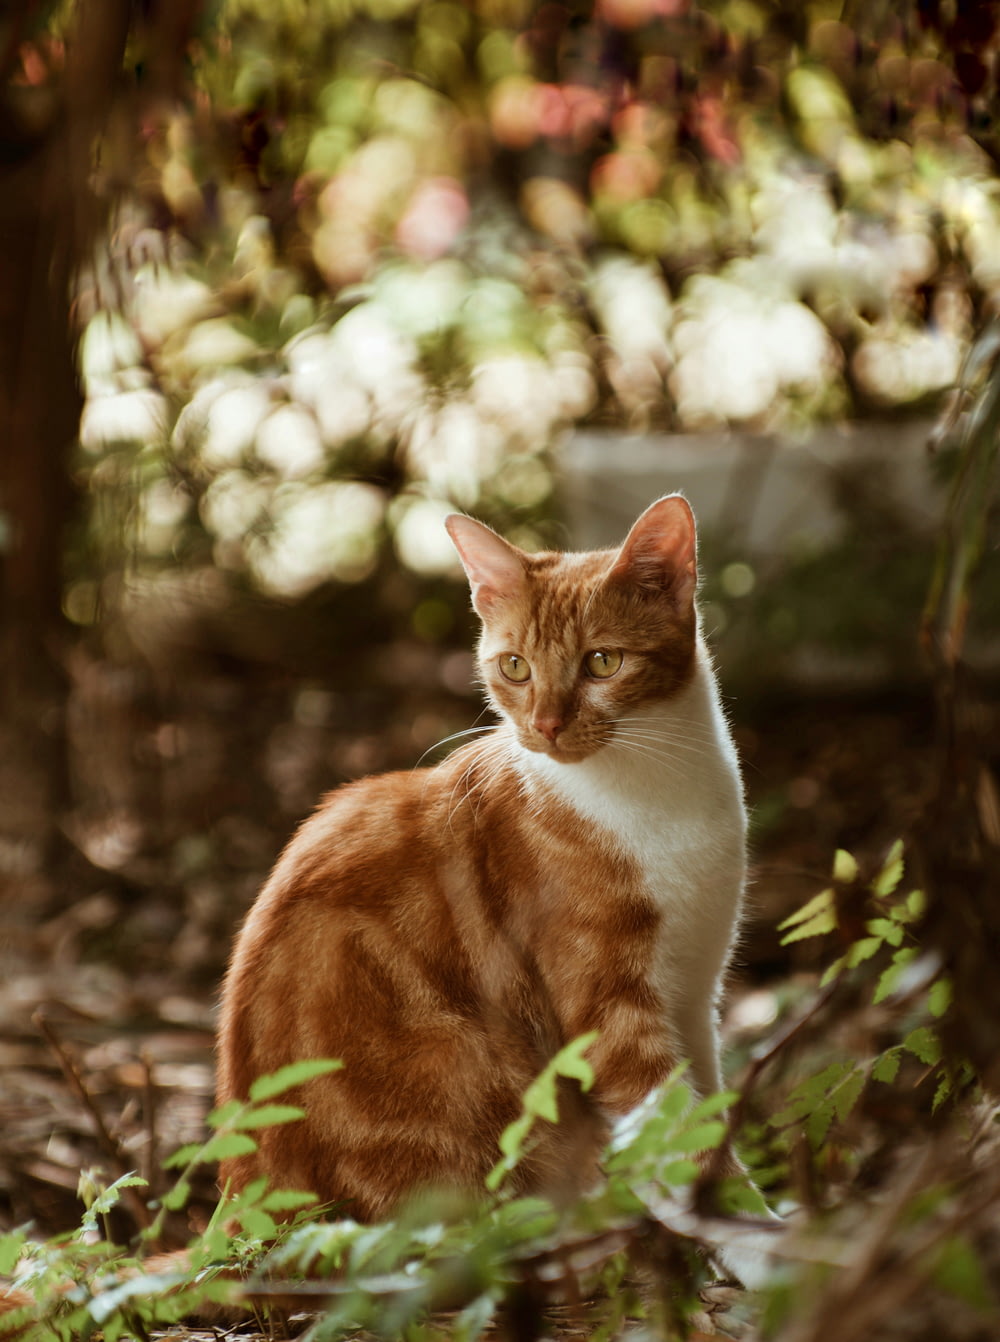 orange and white tabby cat on green grass during daytime